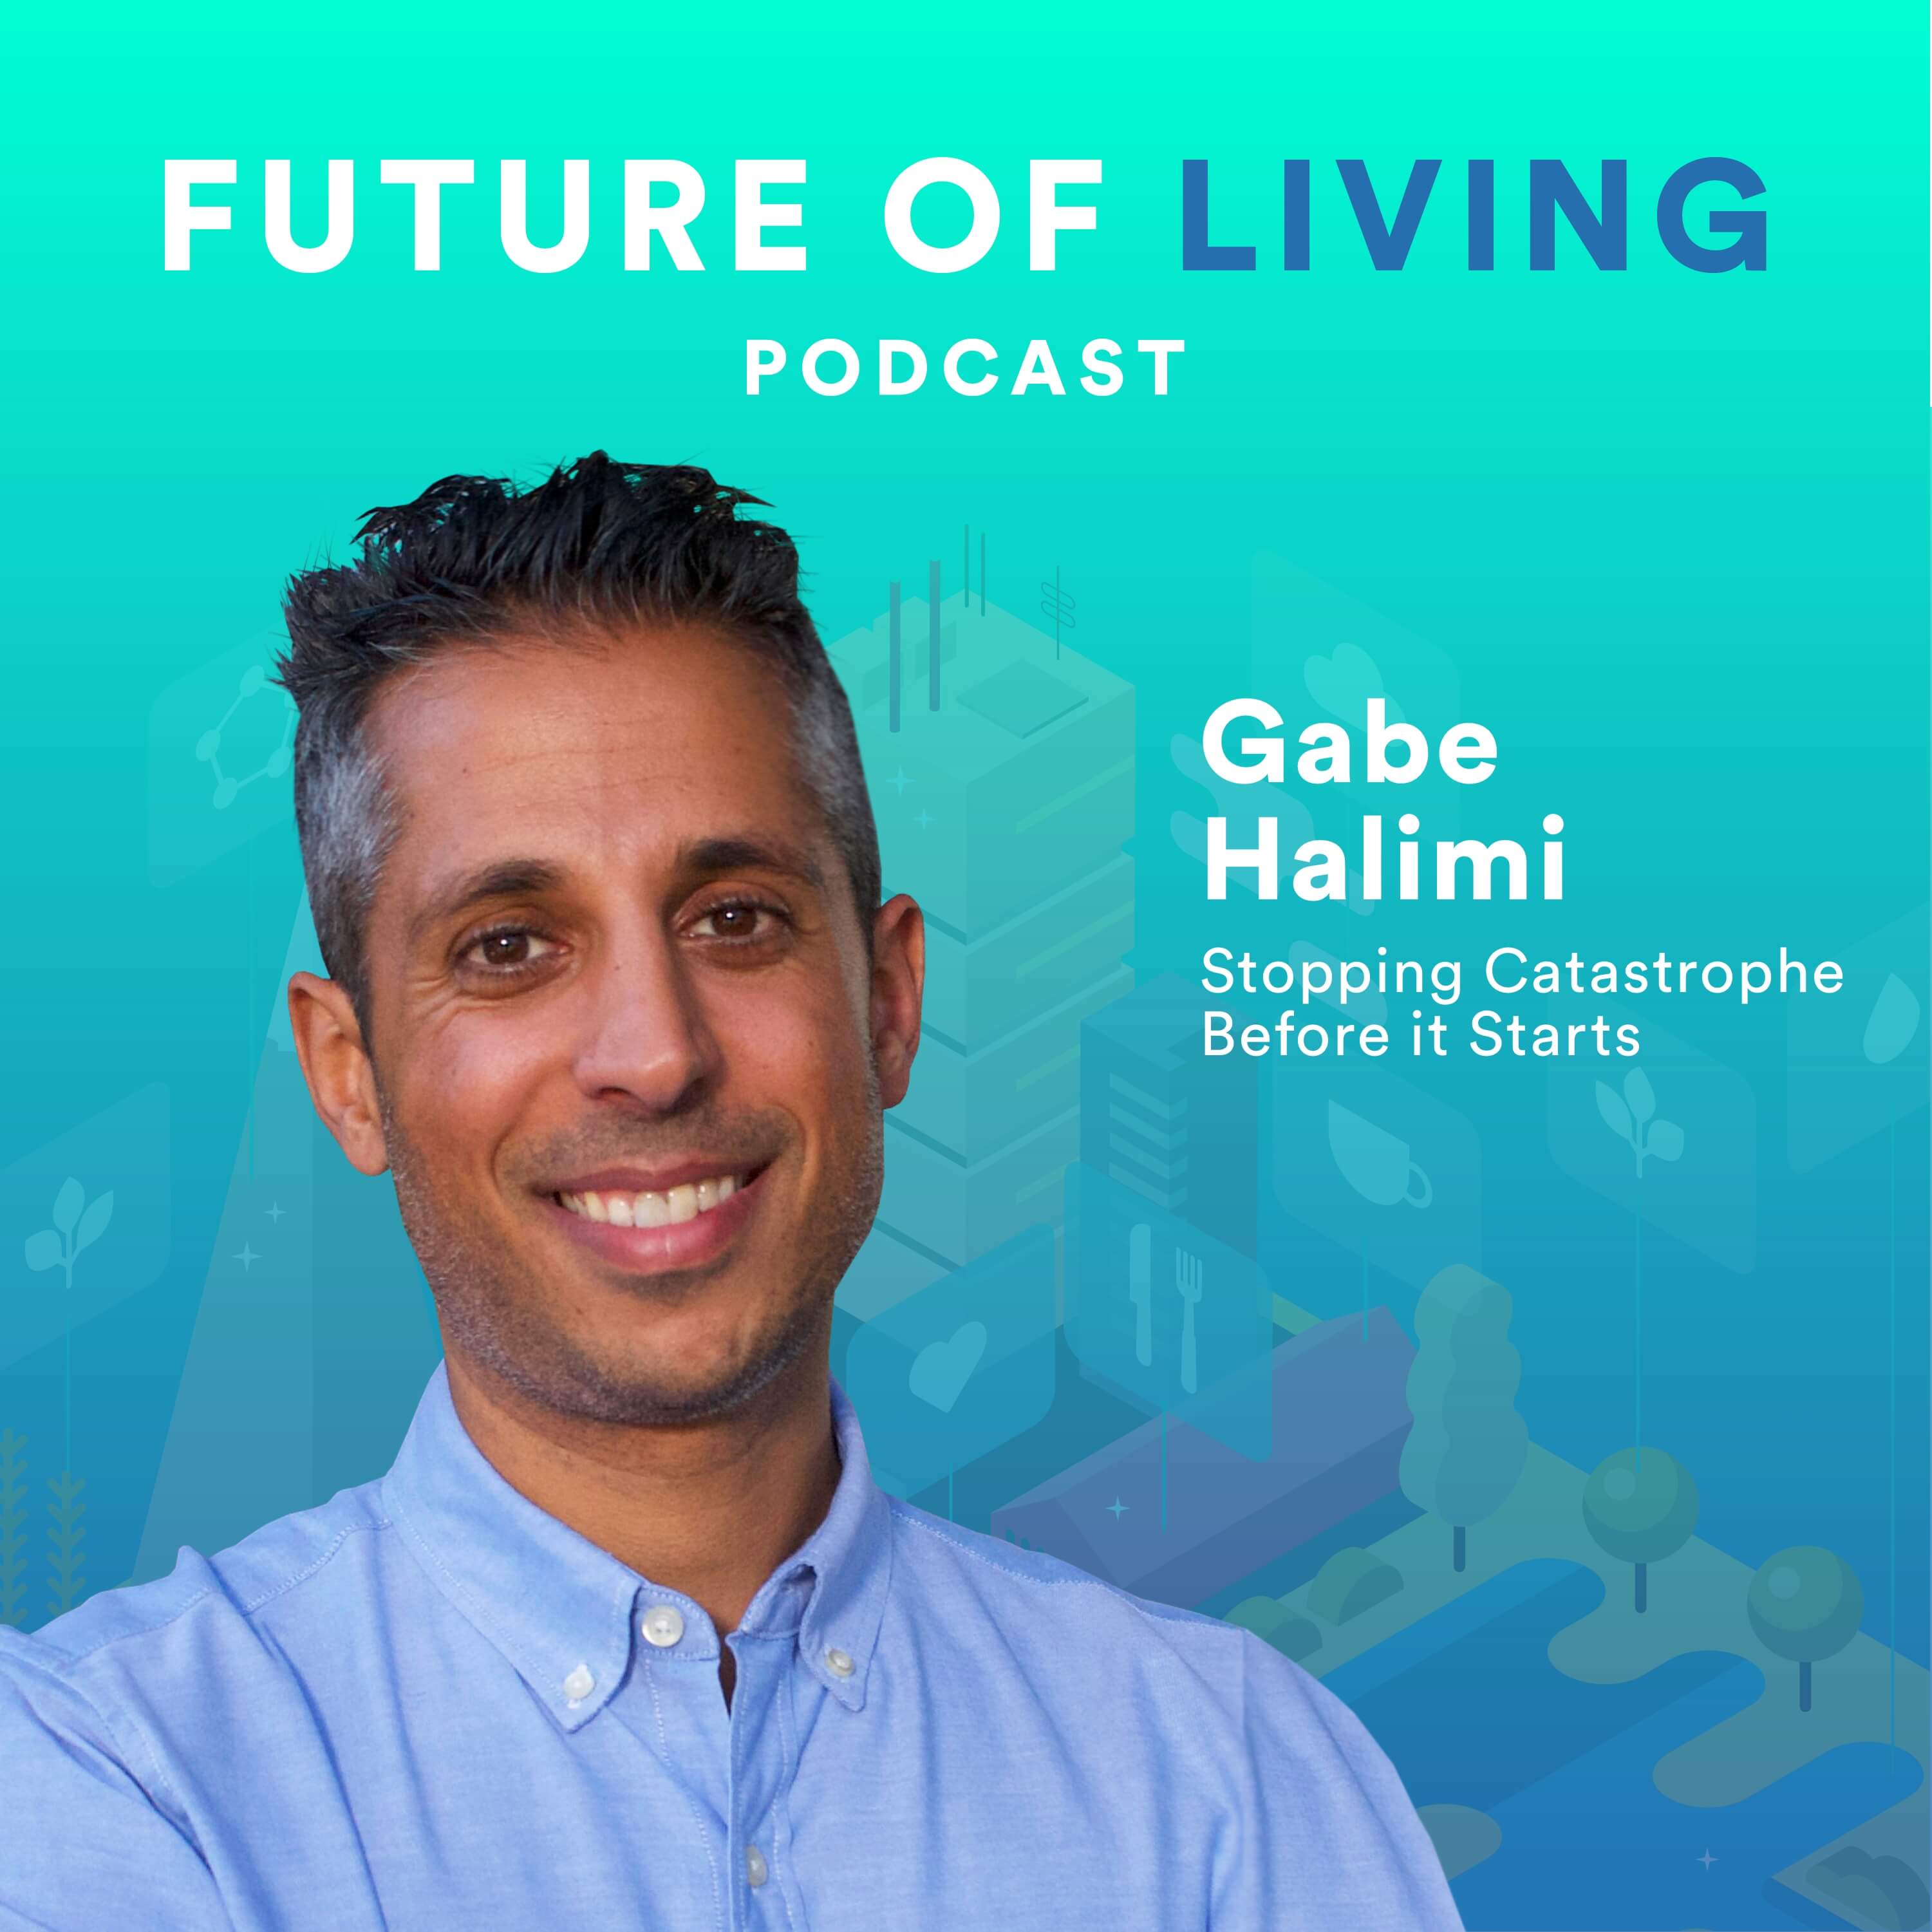 Stopping water damage catastrophe before it starts with Gabe Halimi Flo Technologies